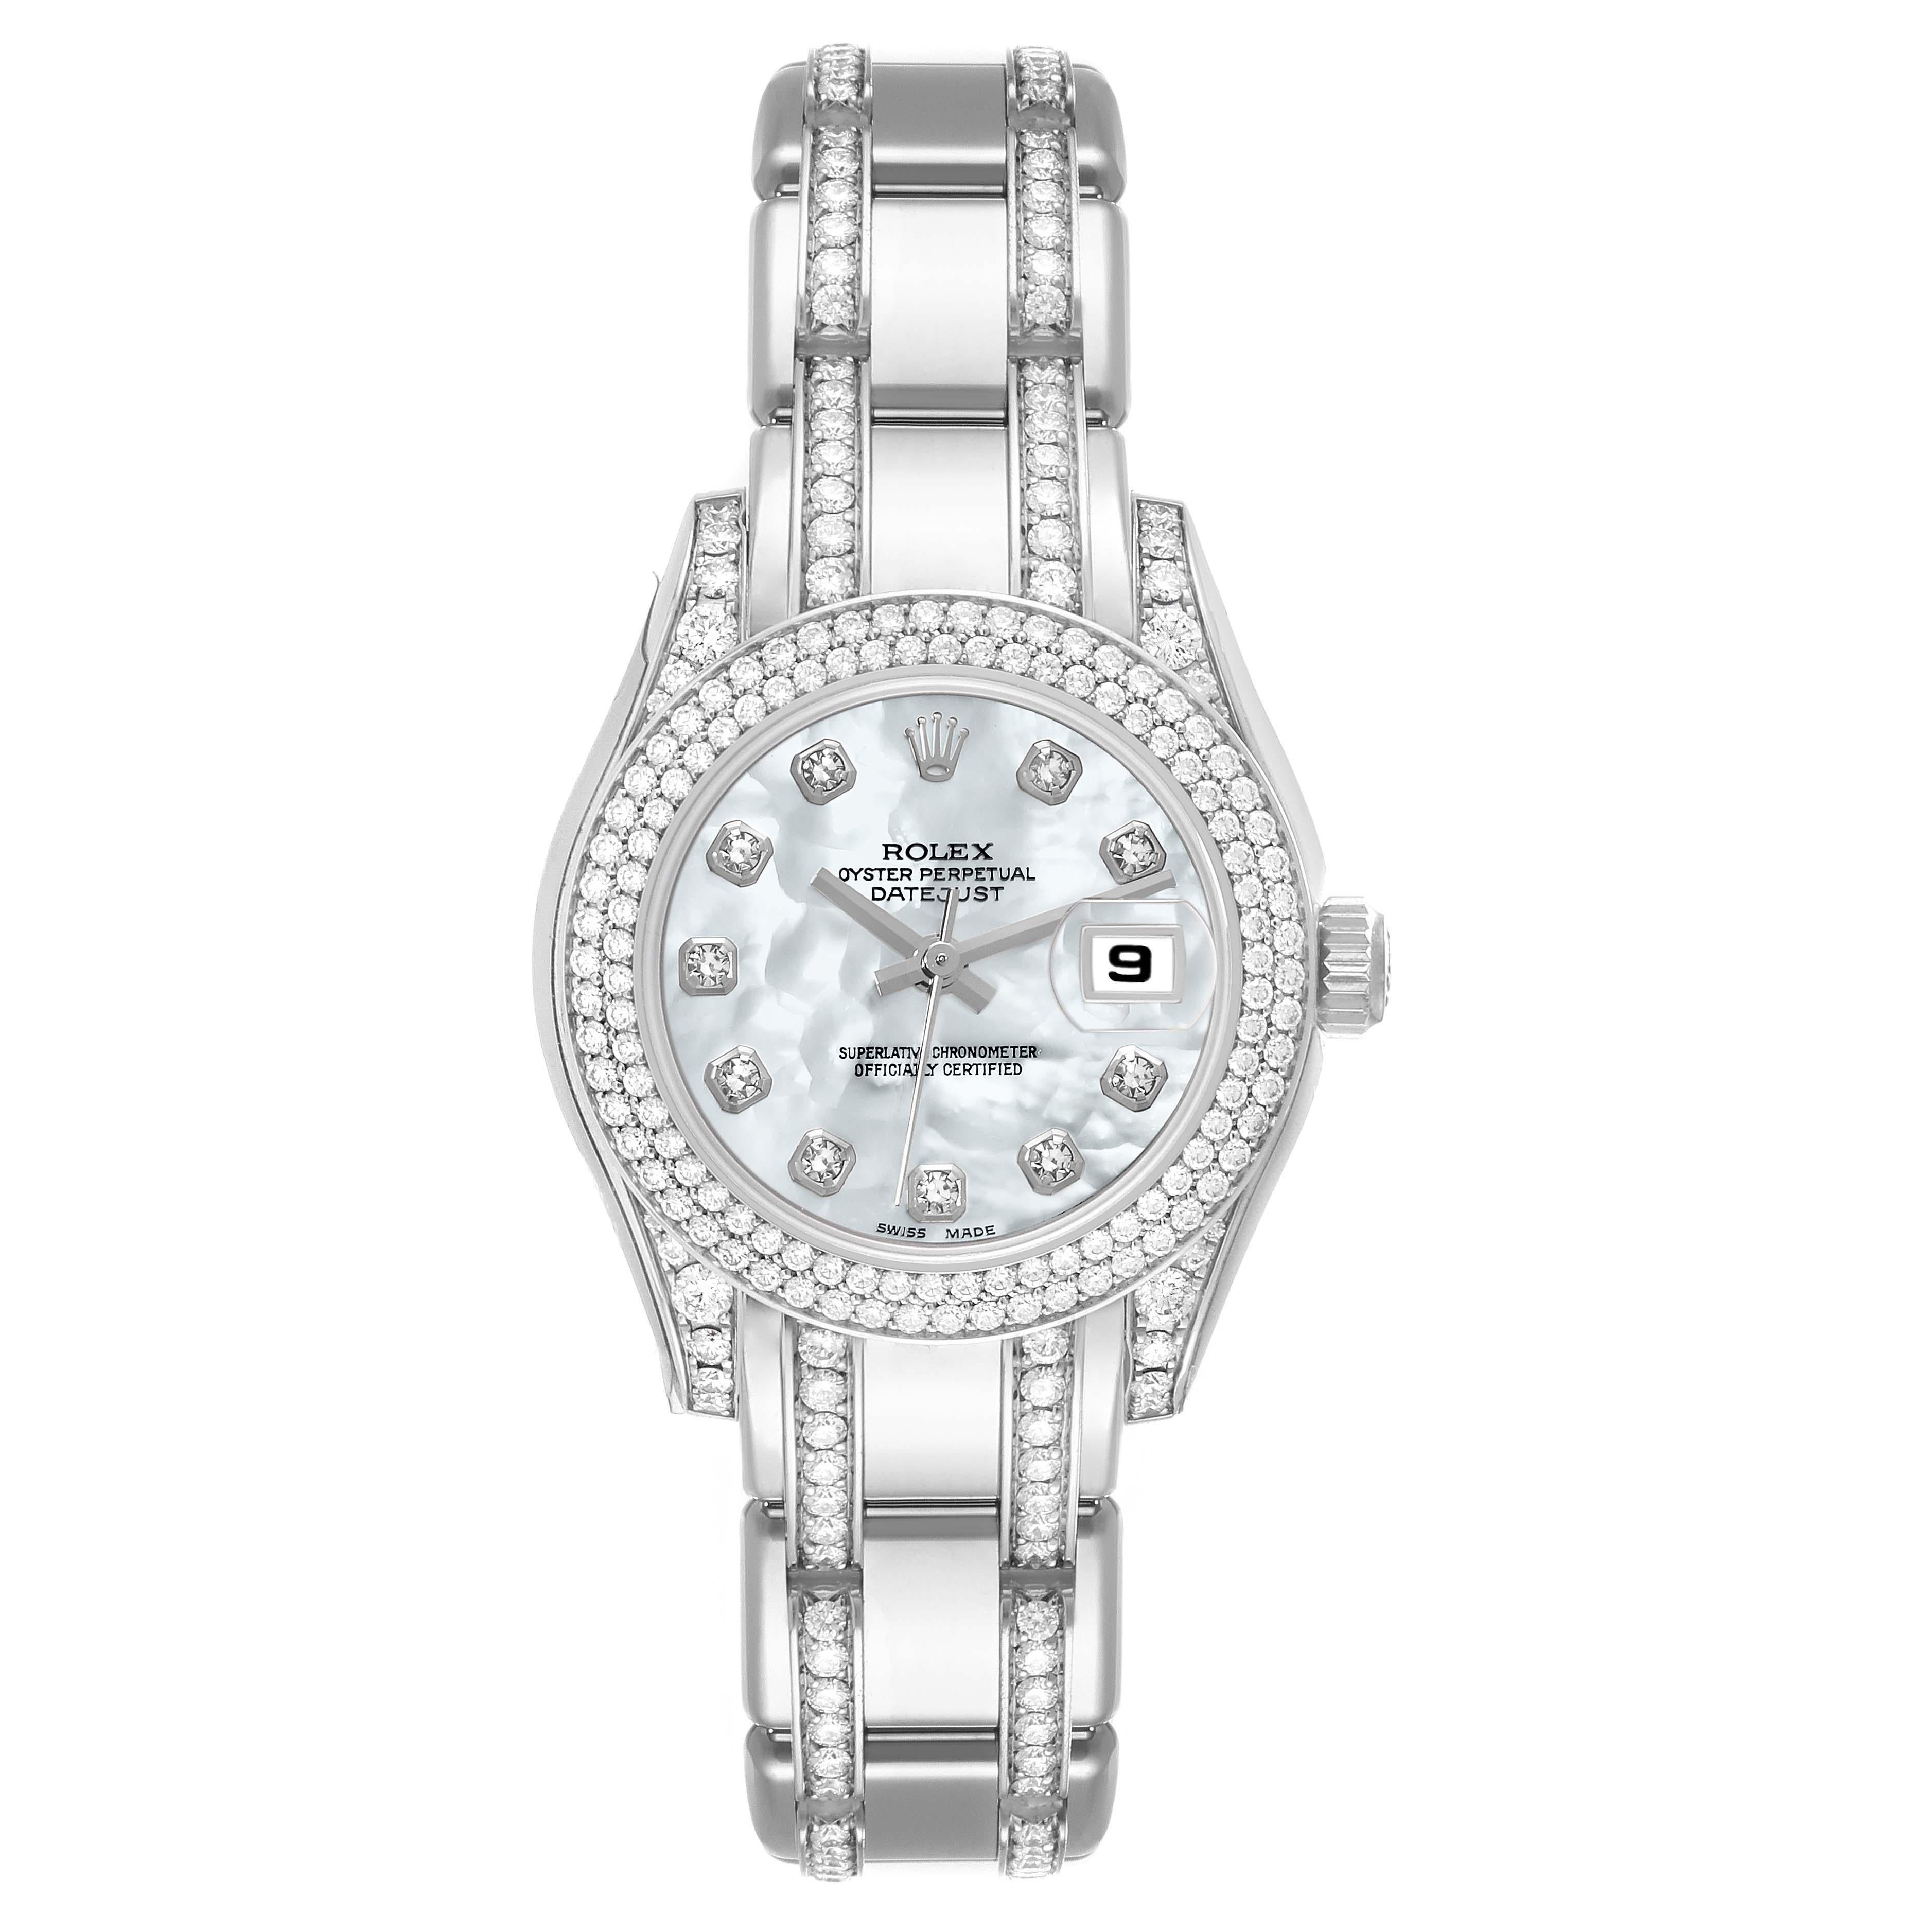 Rolex Pearlmaster White Gold Mother of Pearl Diamond Ladies Watch 80359 Unworn NOS. Officially certified chronometer self-winding movement. 18k white gold oyster case 29.0 mm in diameter. Rolex logo on a crown. Original Rolex factory diamond bezel.